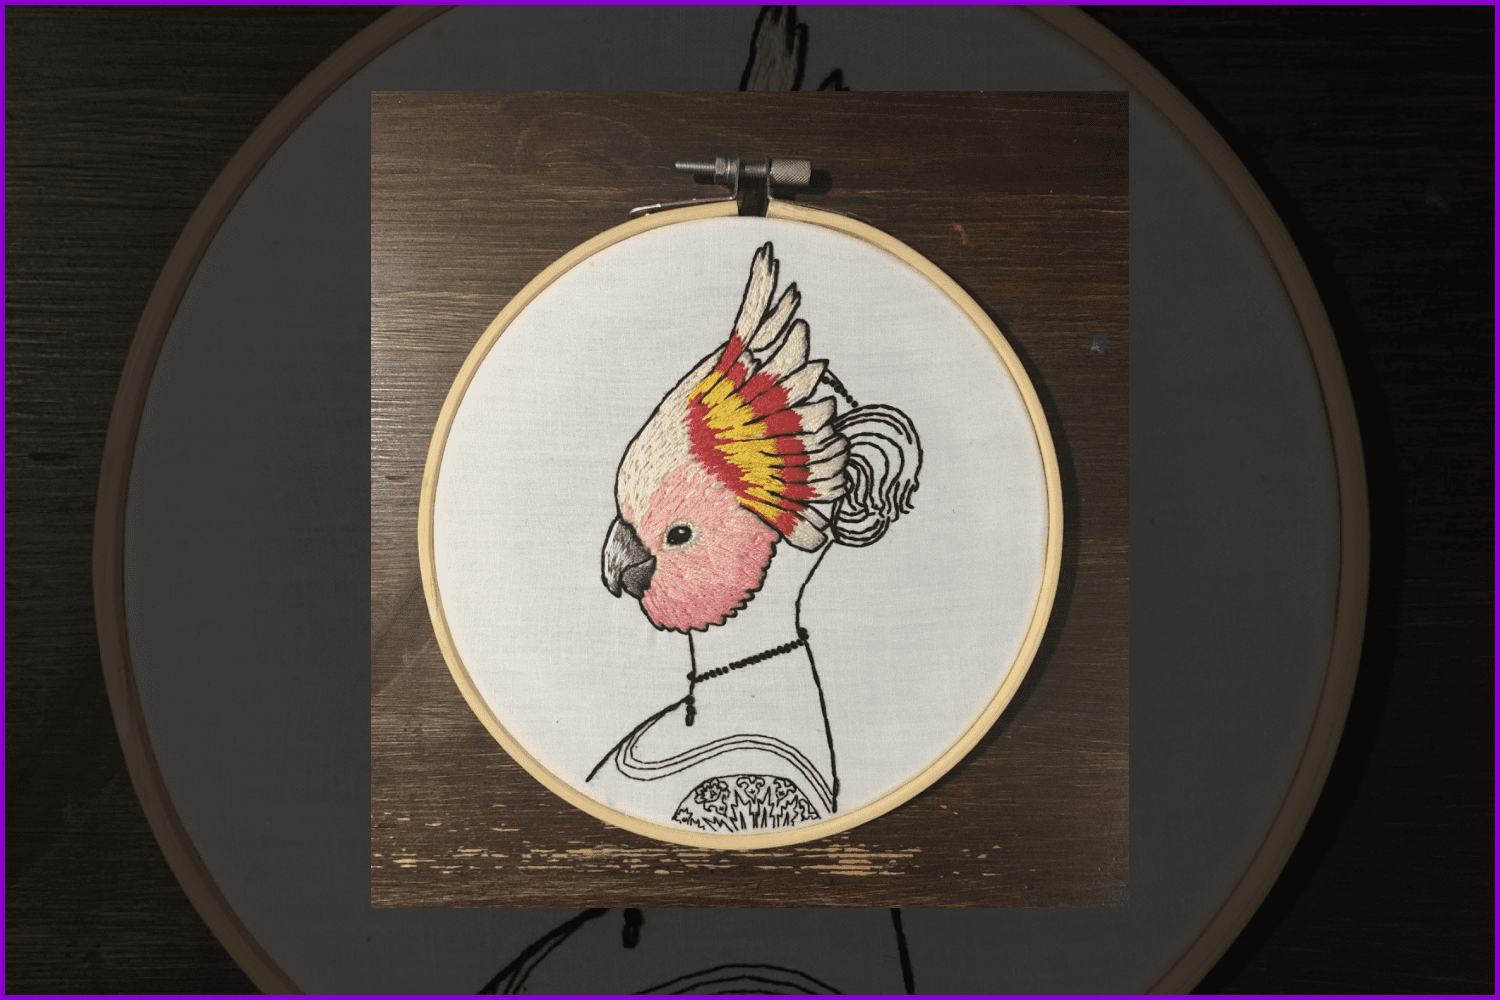 Embroidery with Renaissance figure in colorfull parrot mask.